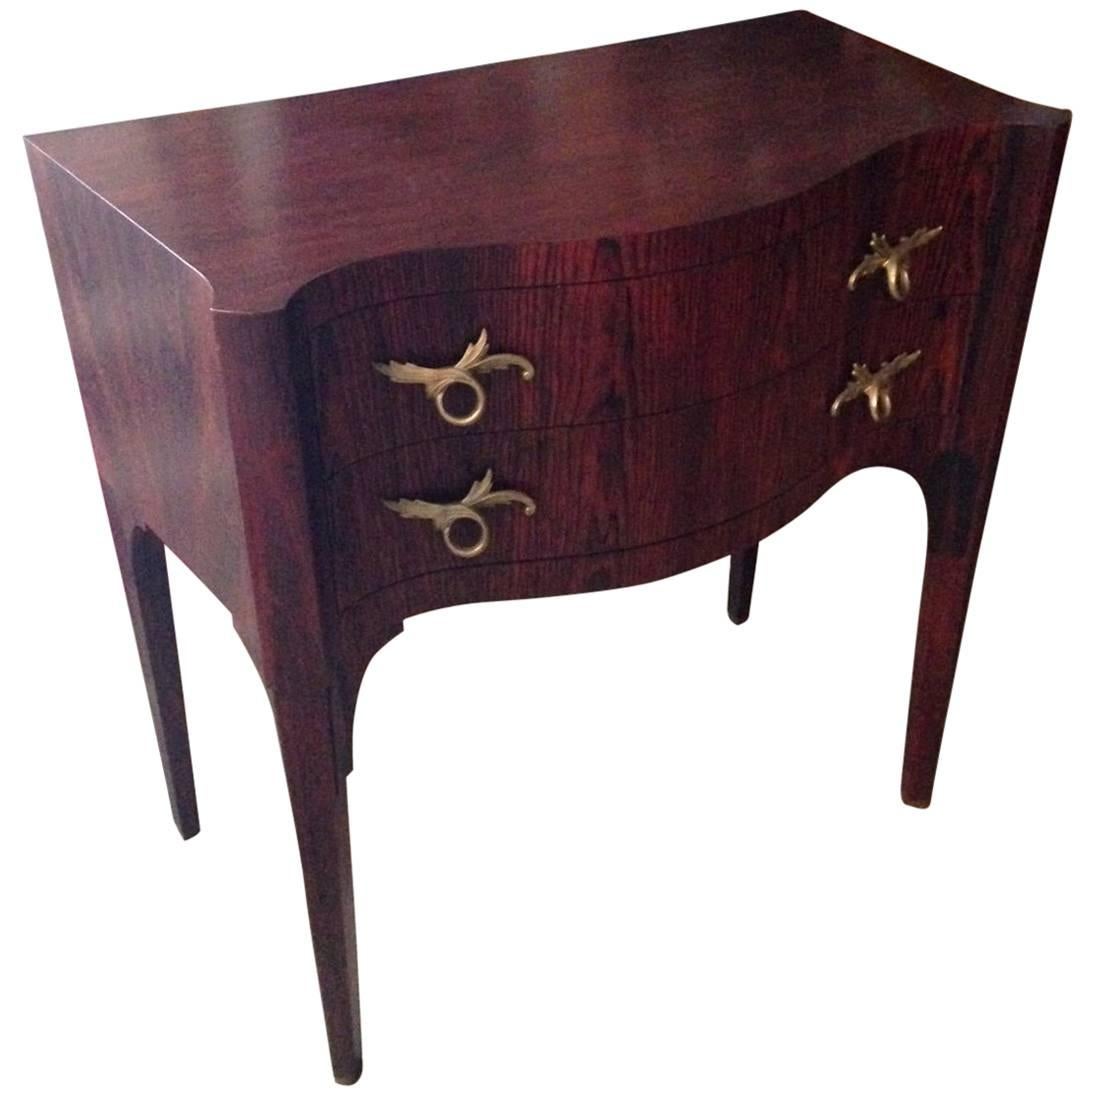 Edward Wormley for Dunbar Serpentine Rosewood Commode